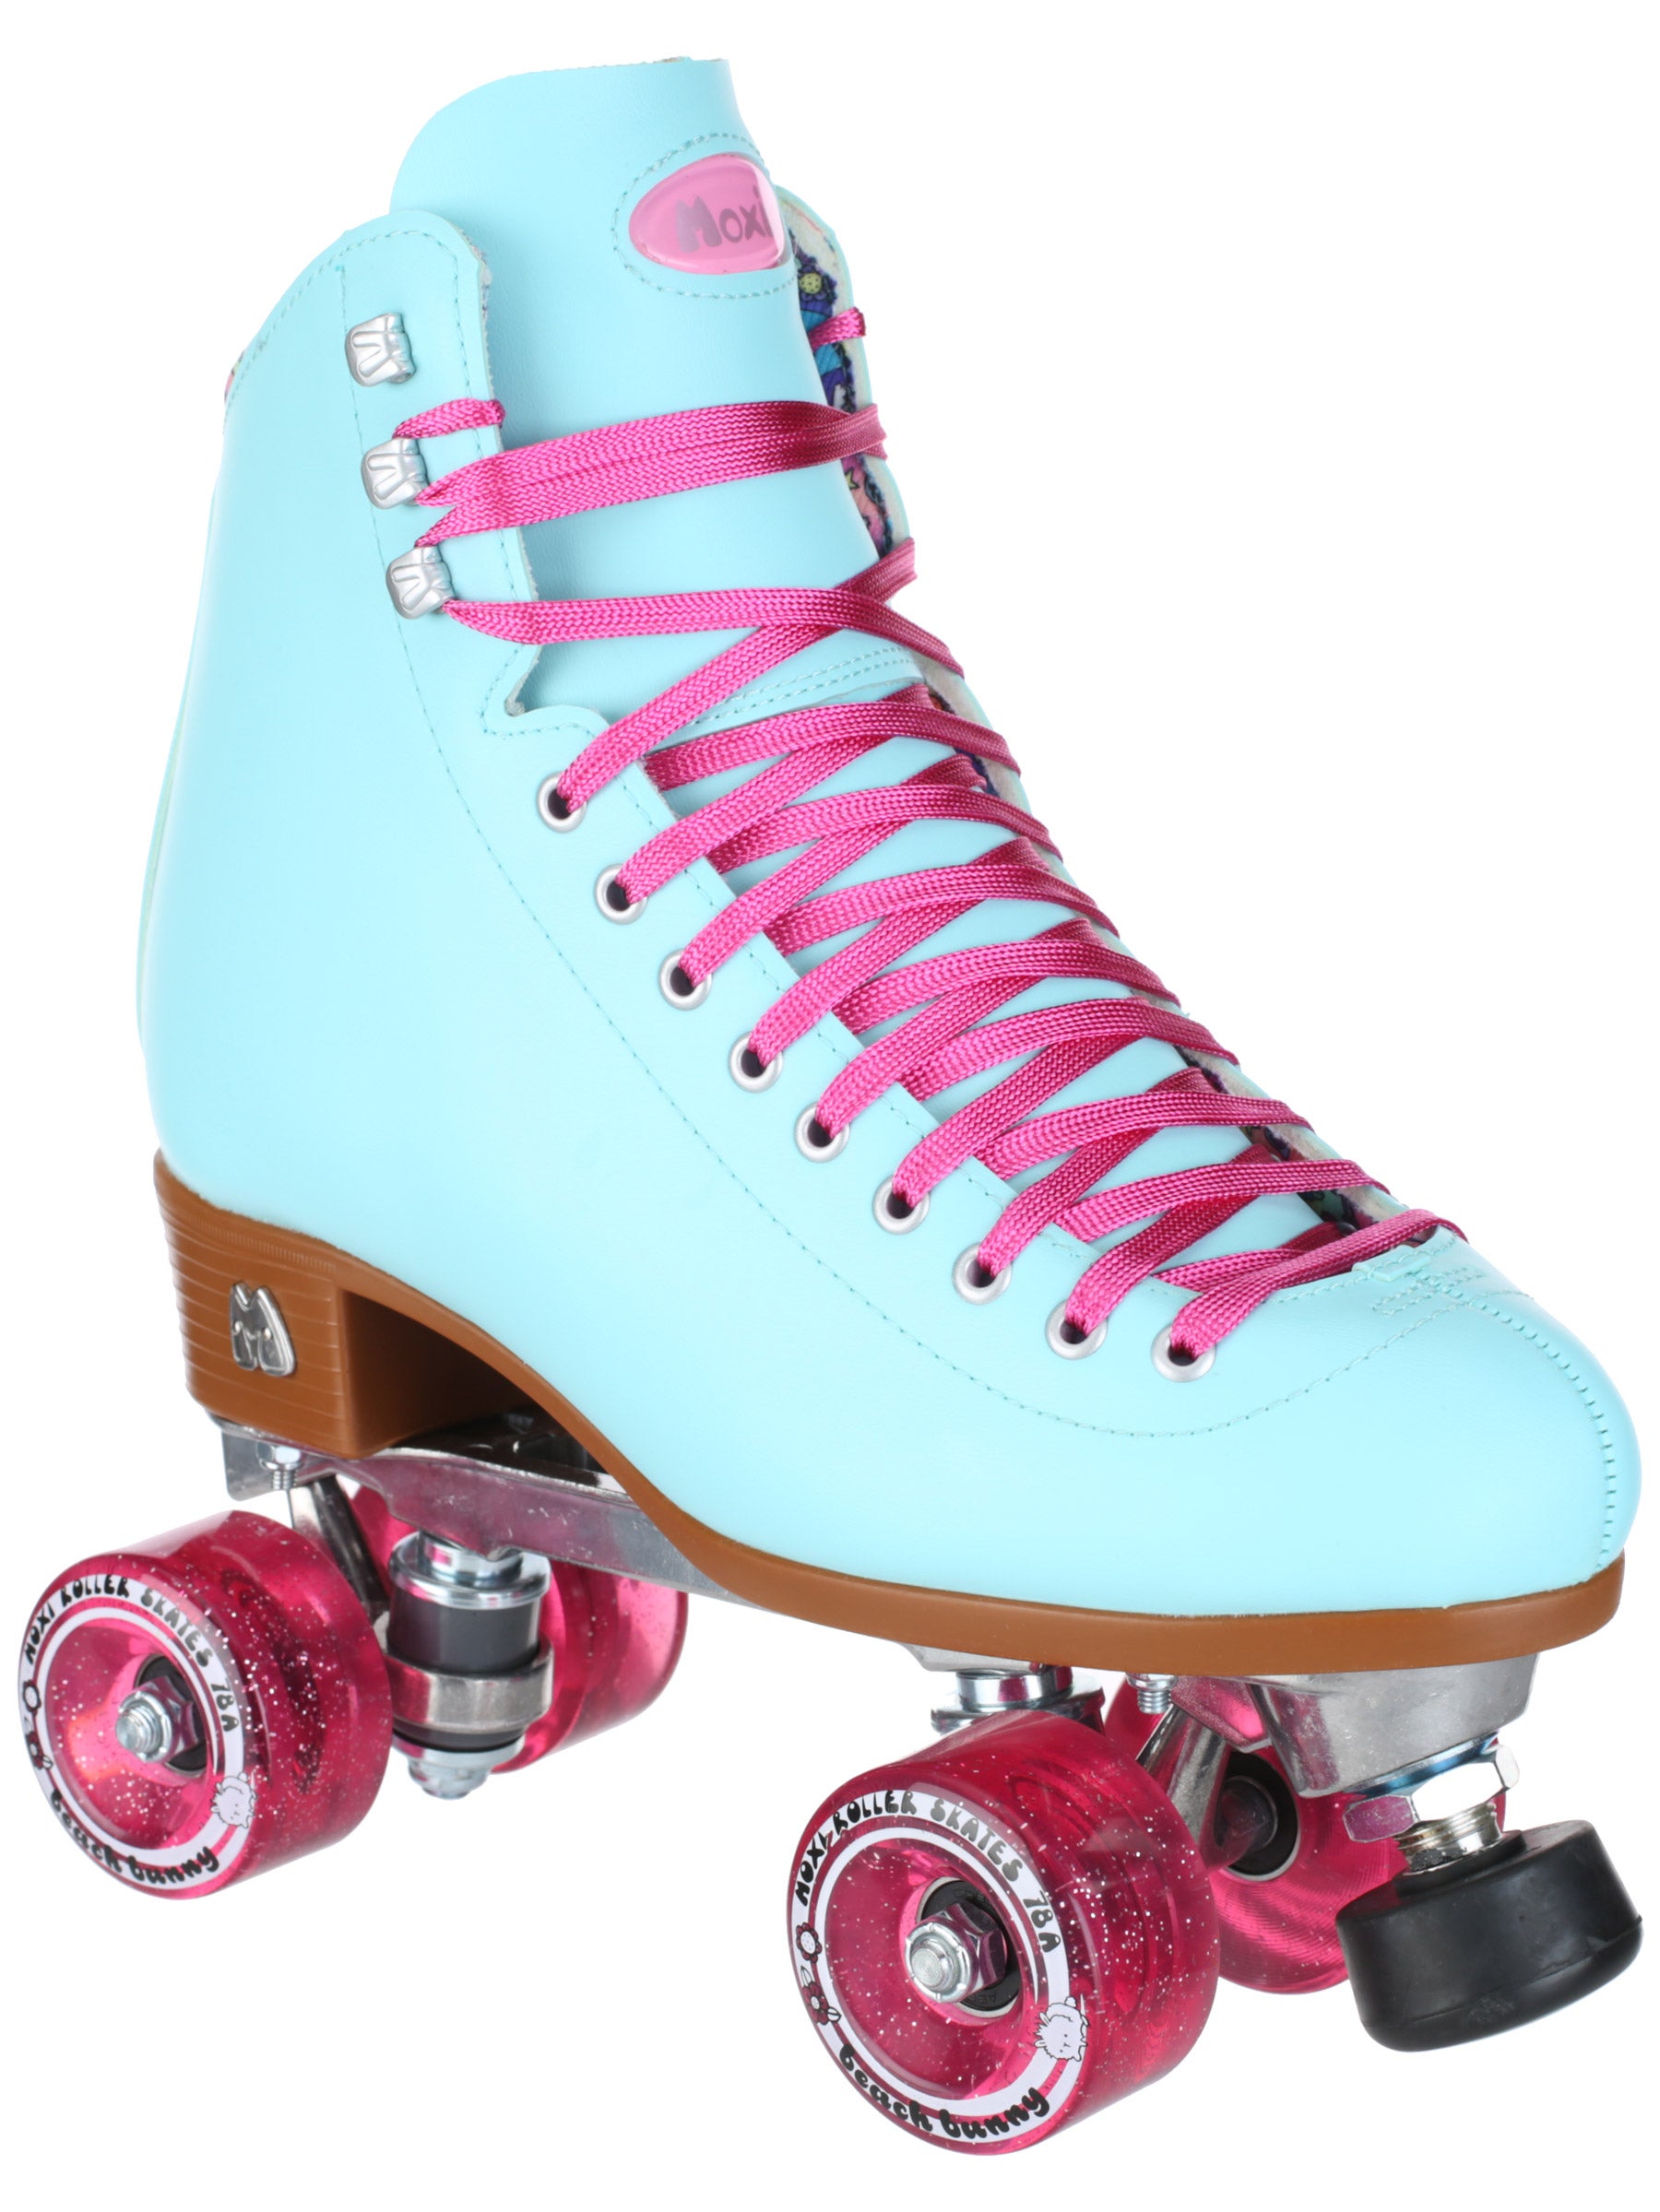 New READY TO SHIP NOW! Details about   Moxi Beach Bunny Watermelon Roller Skates Size 7 w8-8.5 